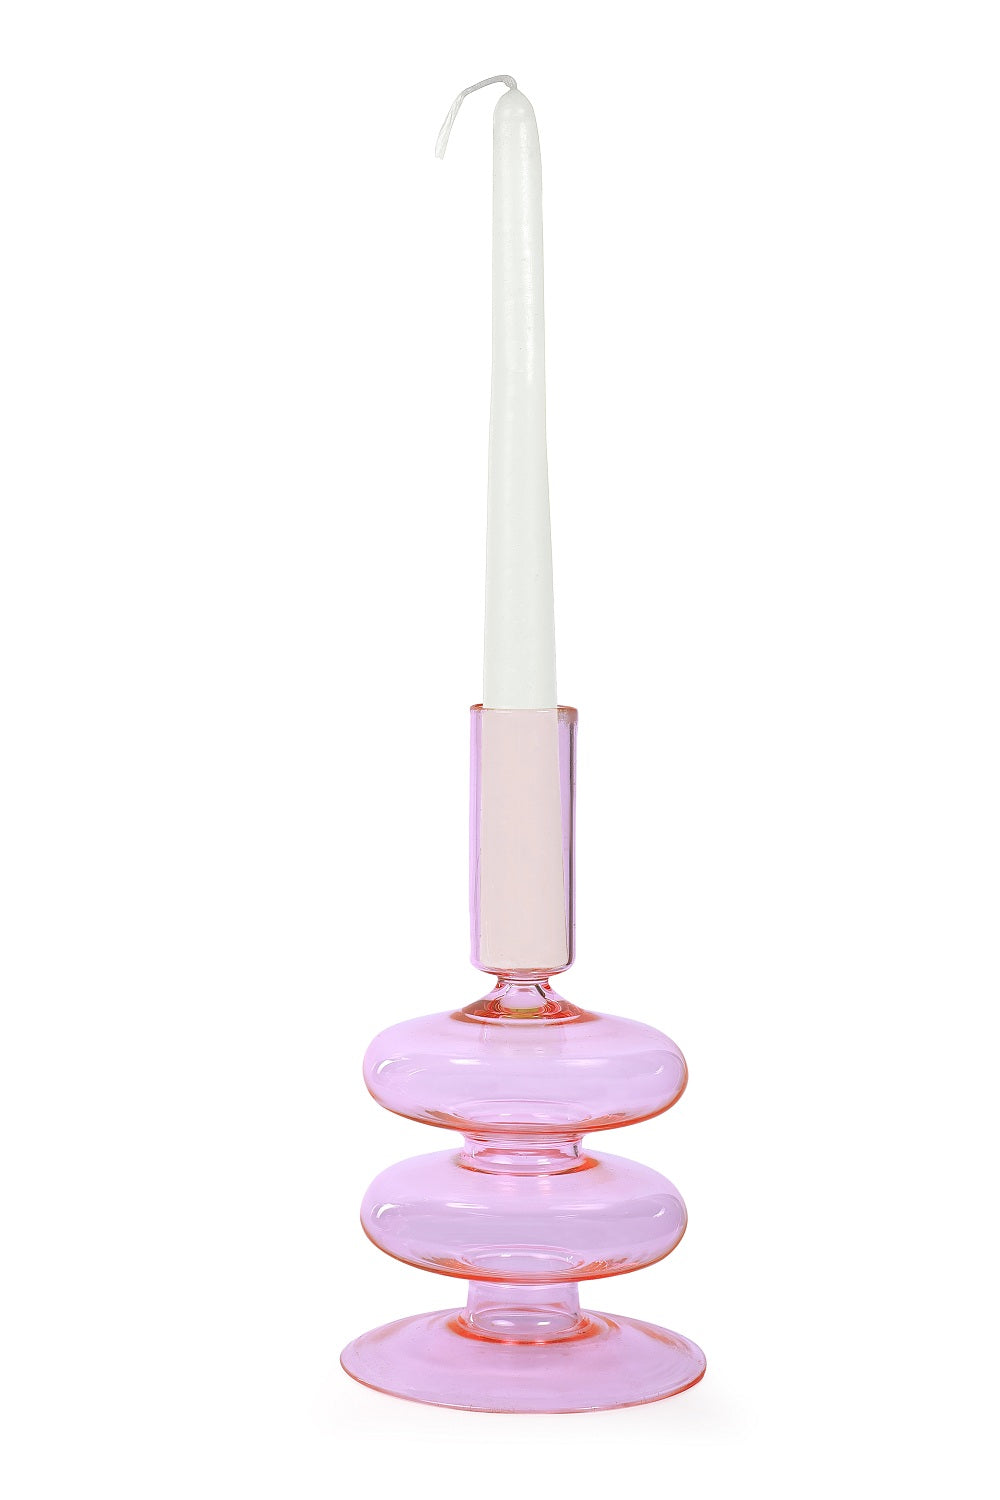 Retro Wavy Glass Candle Holder- 7 x3.5 Inches_Pink (Set of 2)